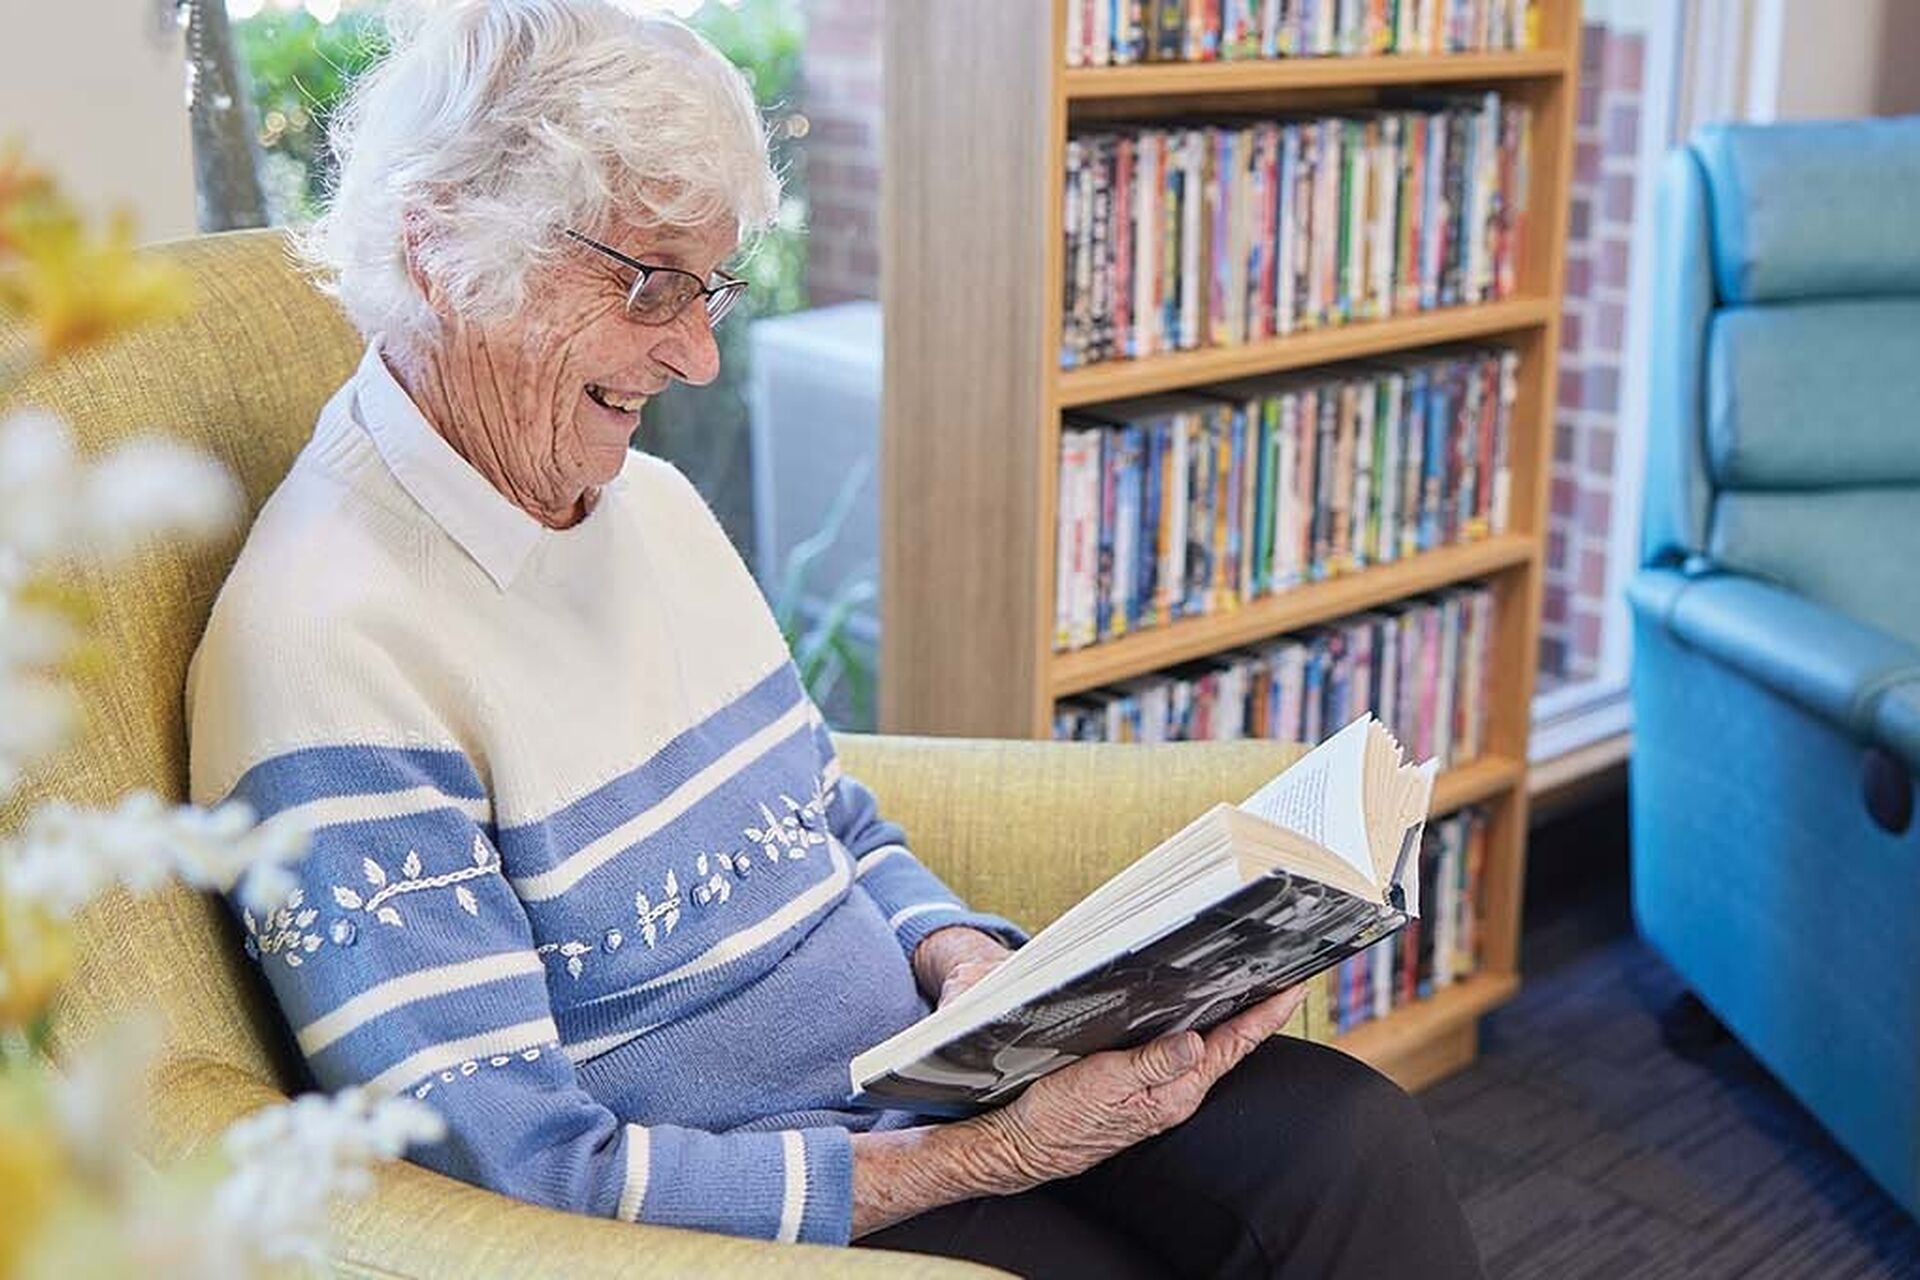 aged care resident enjoying reading a book in the library at baptistcare bethshan gardens centre aged care home in wyee nsw lake macquarie